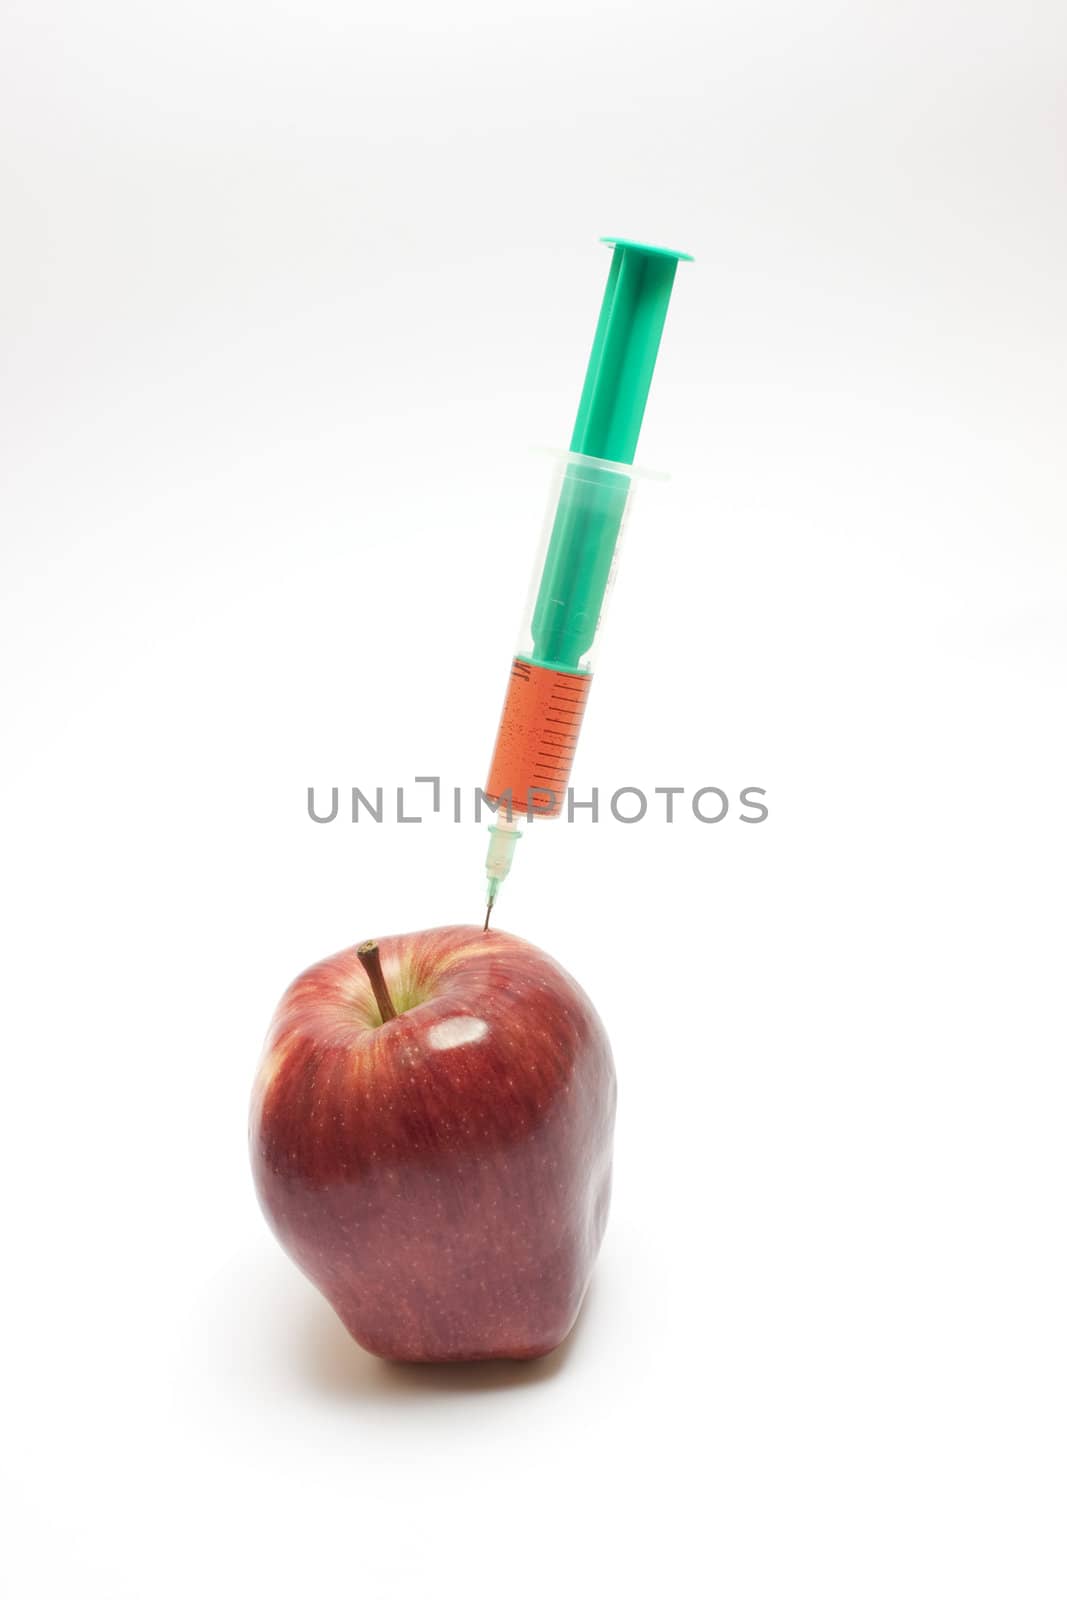 Red apple and syringe by Arsen